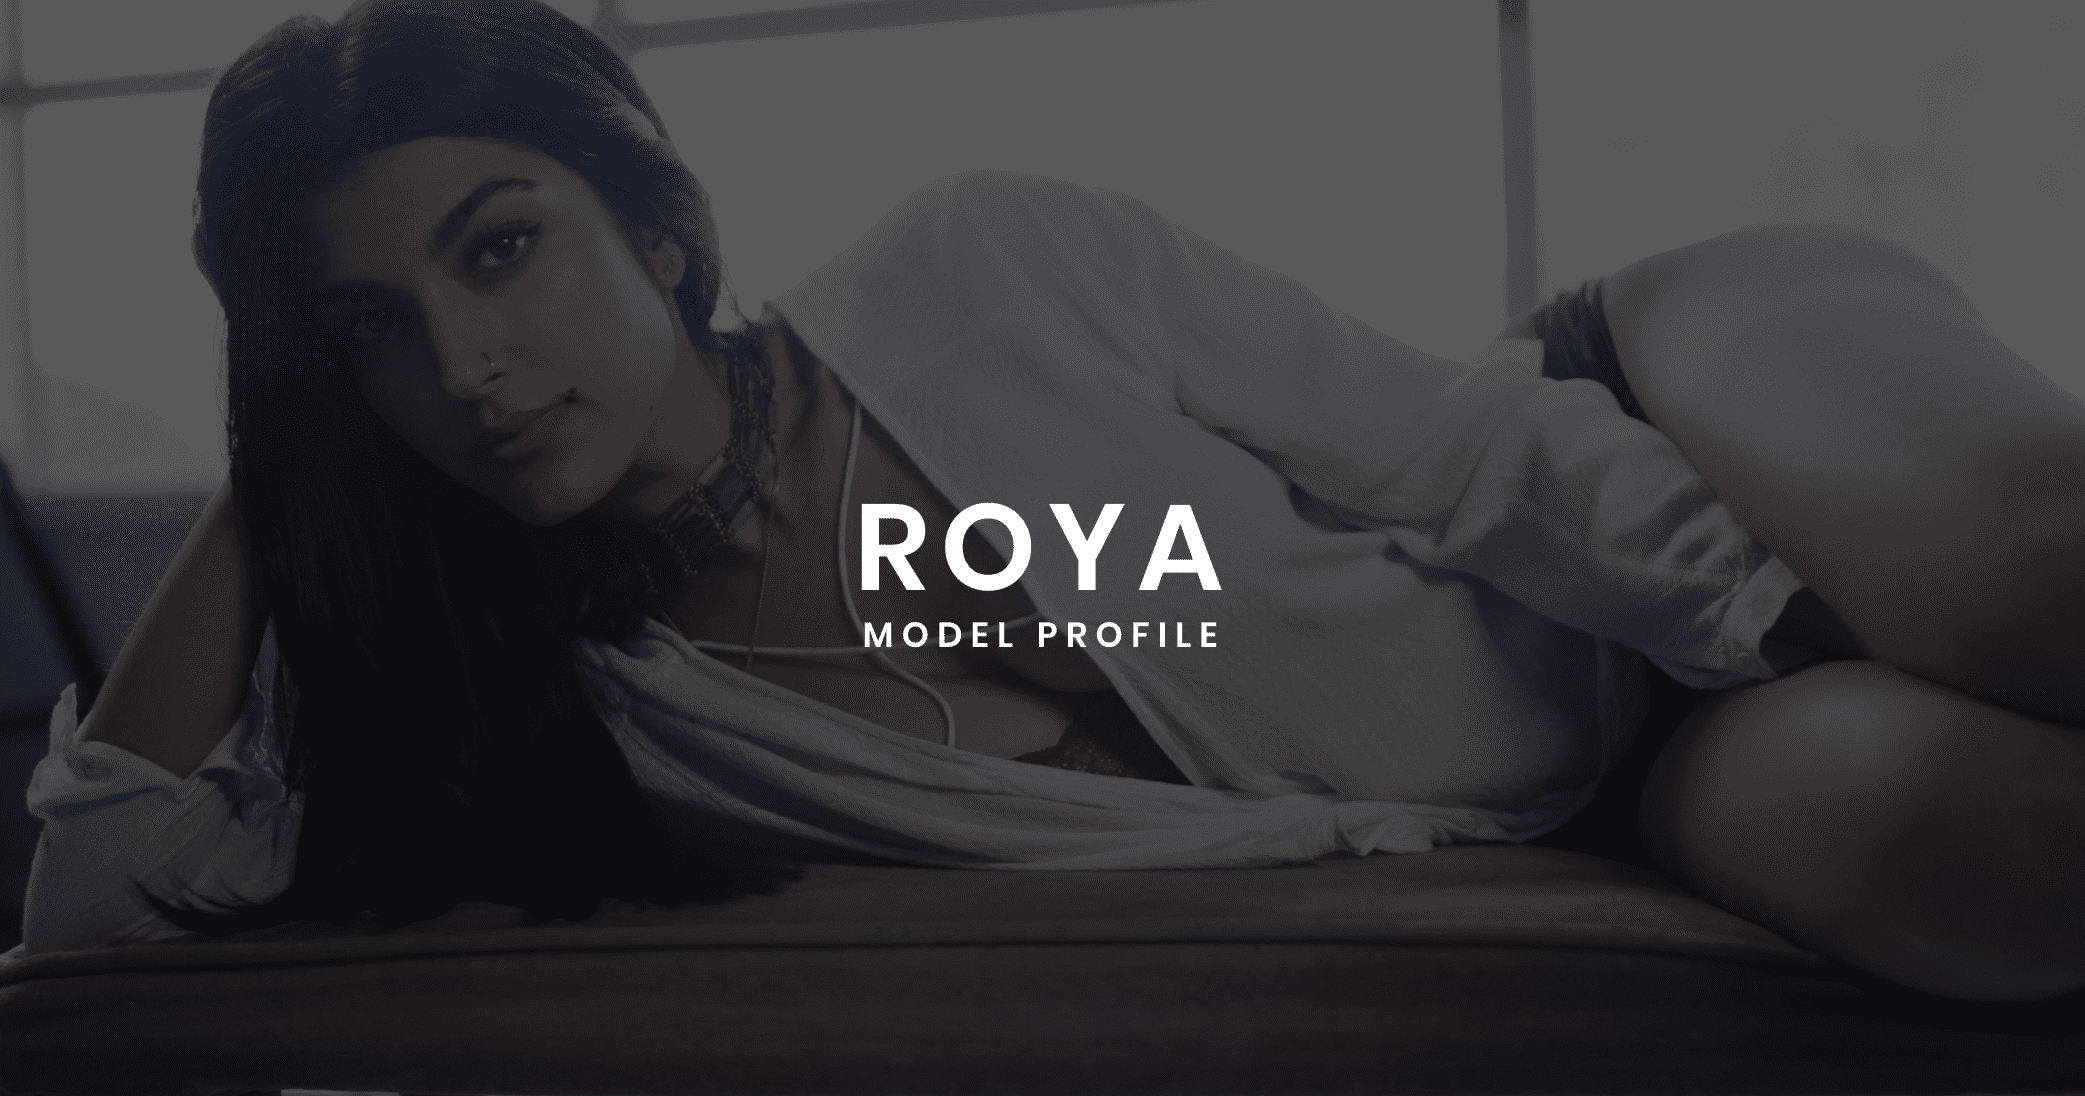 White Roya Zangoui Model Profile logo with woman with long hair laying on her side posing for camera in the background